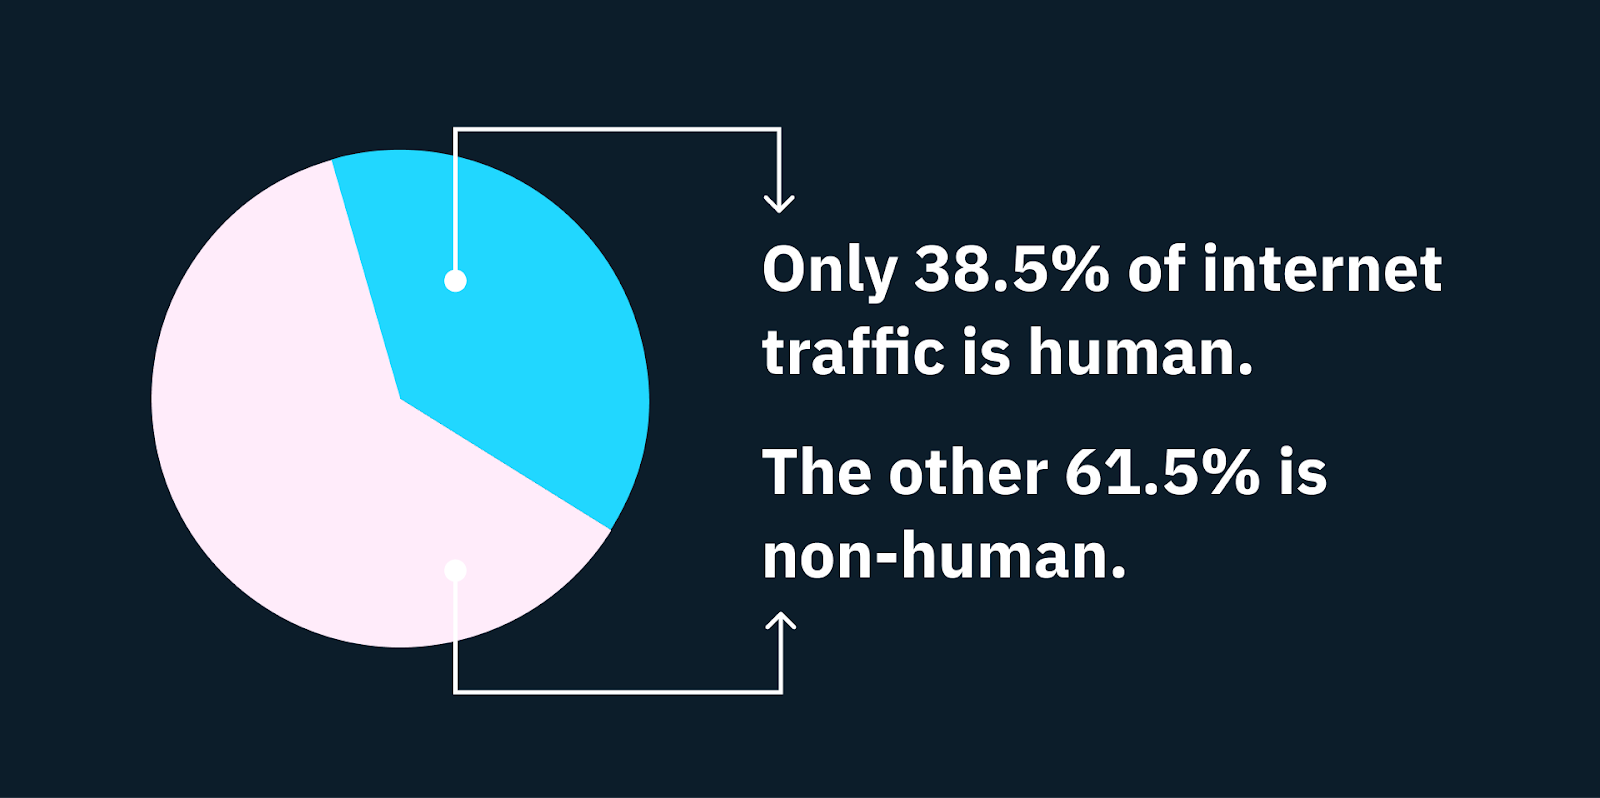 A pie chart illustrating that only 38.5% of internet traffic is human, while the other 61.5% is bots